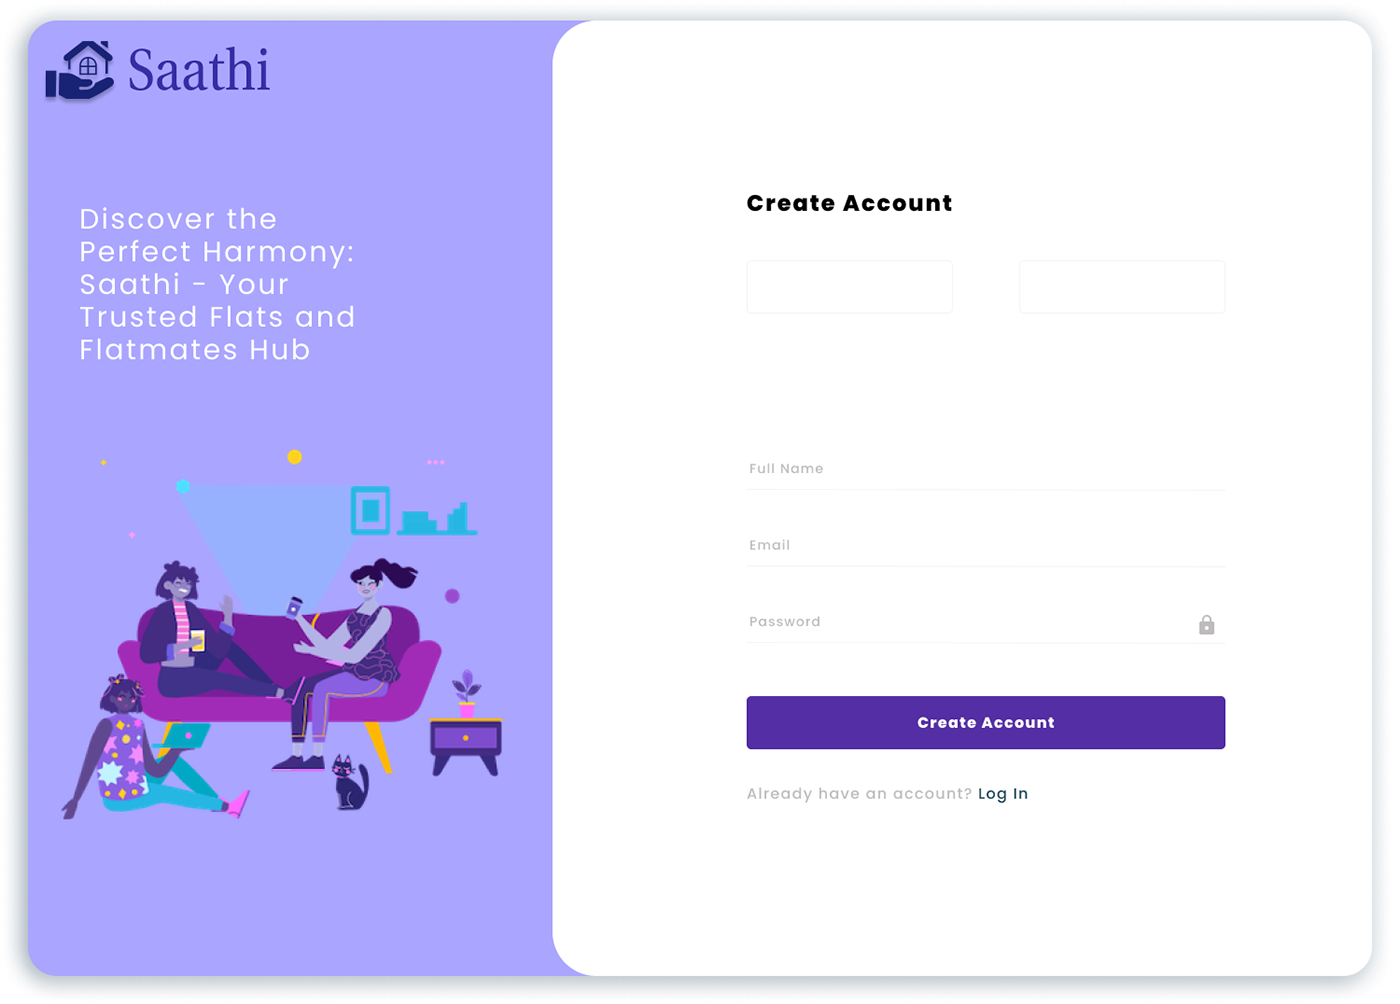 Sign Up Page of Saathi
